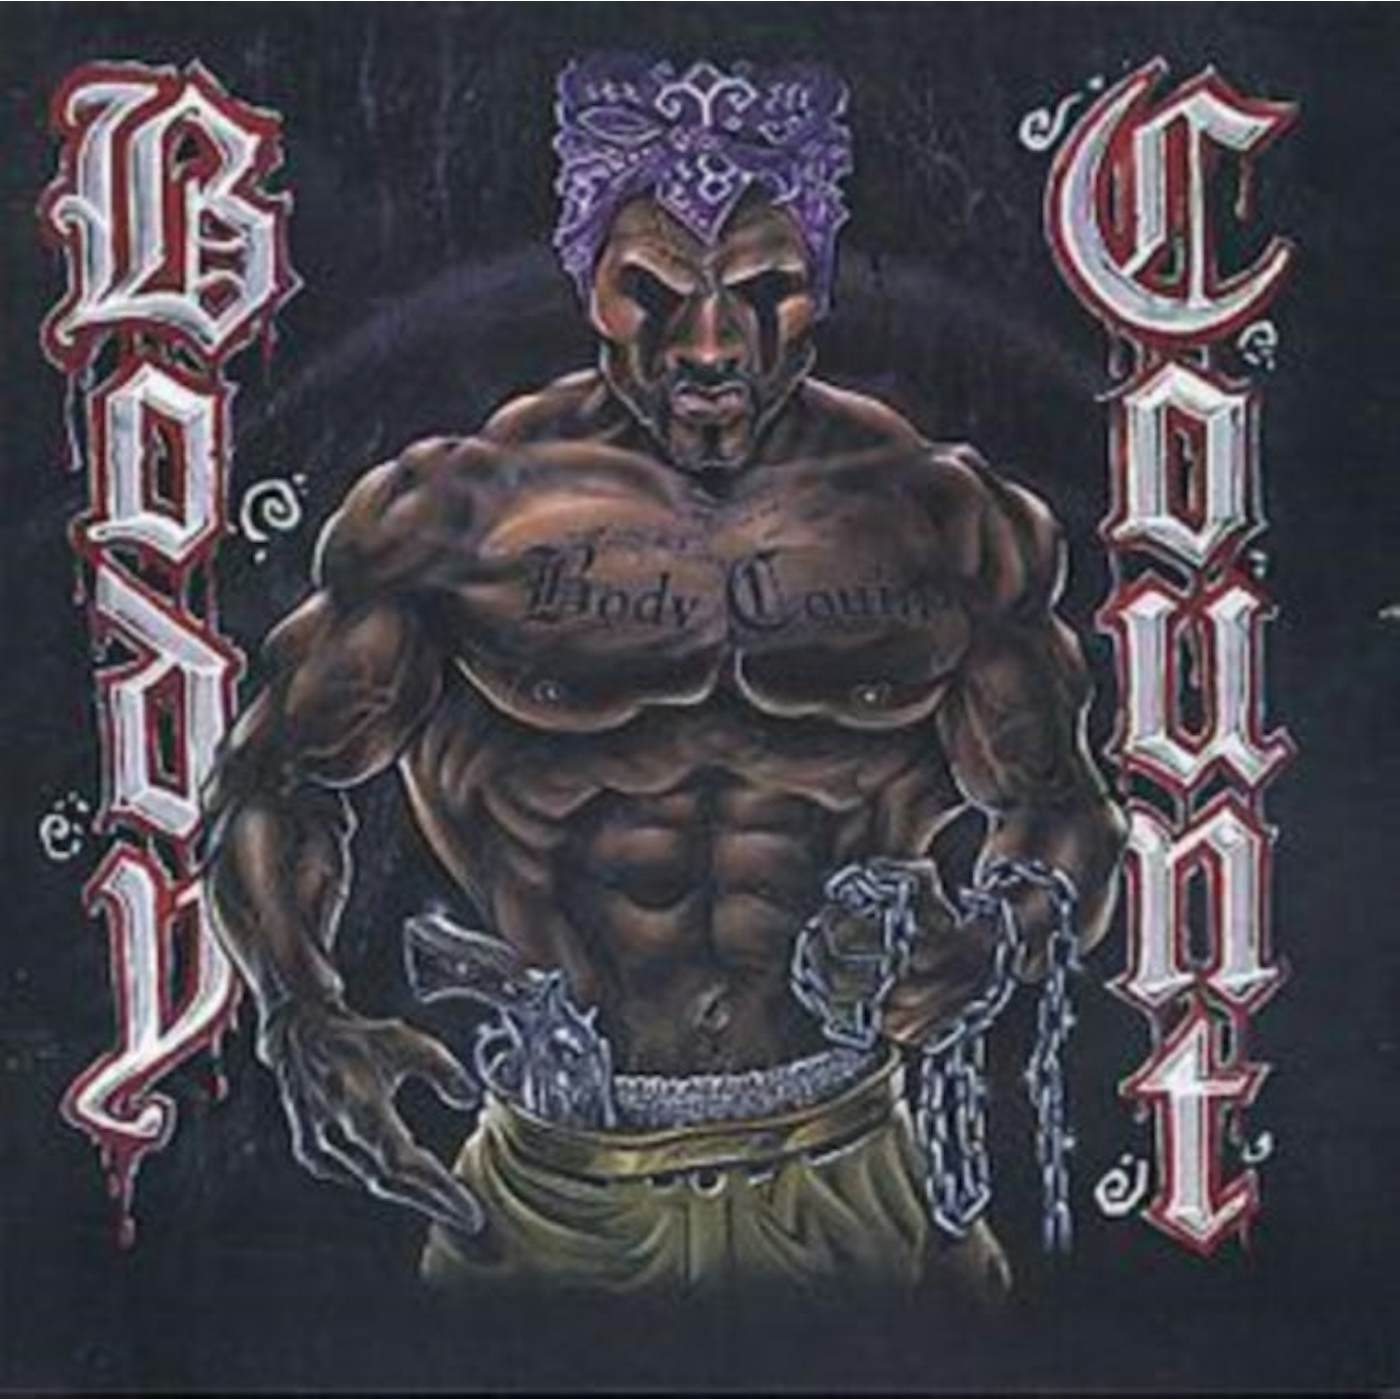 Body Count CD - Body Count